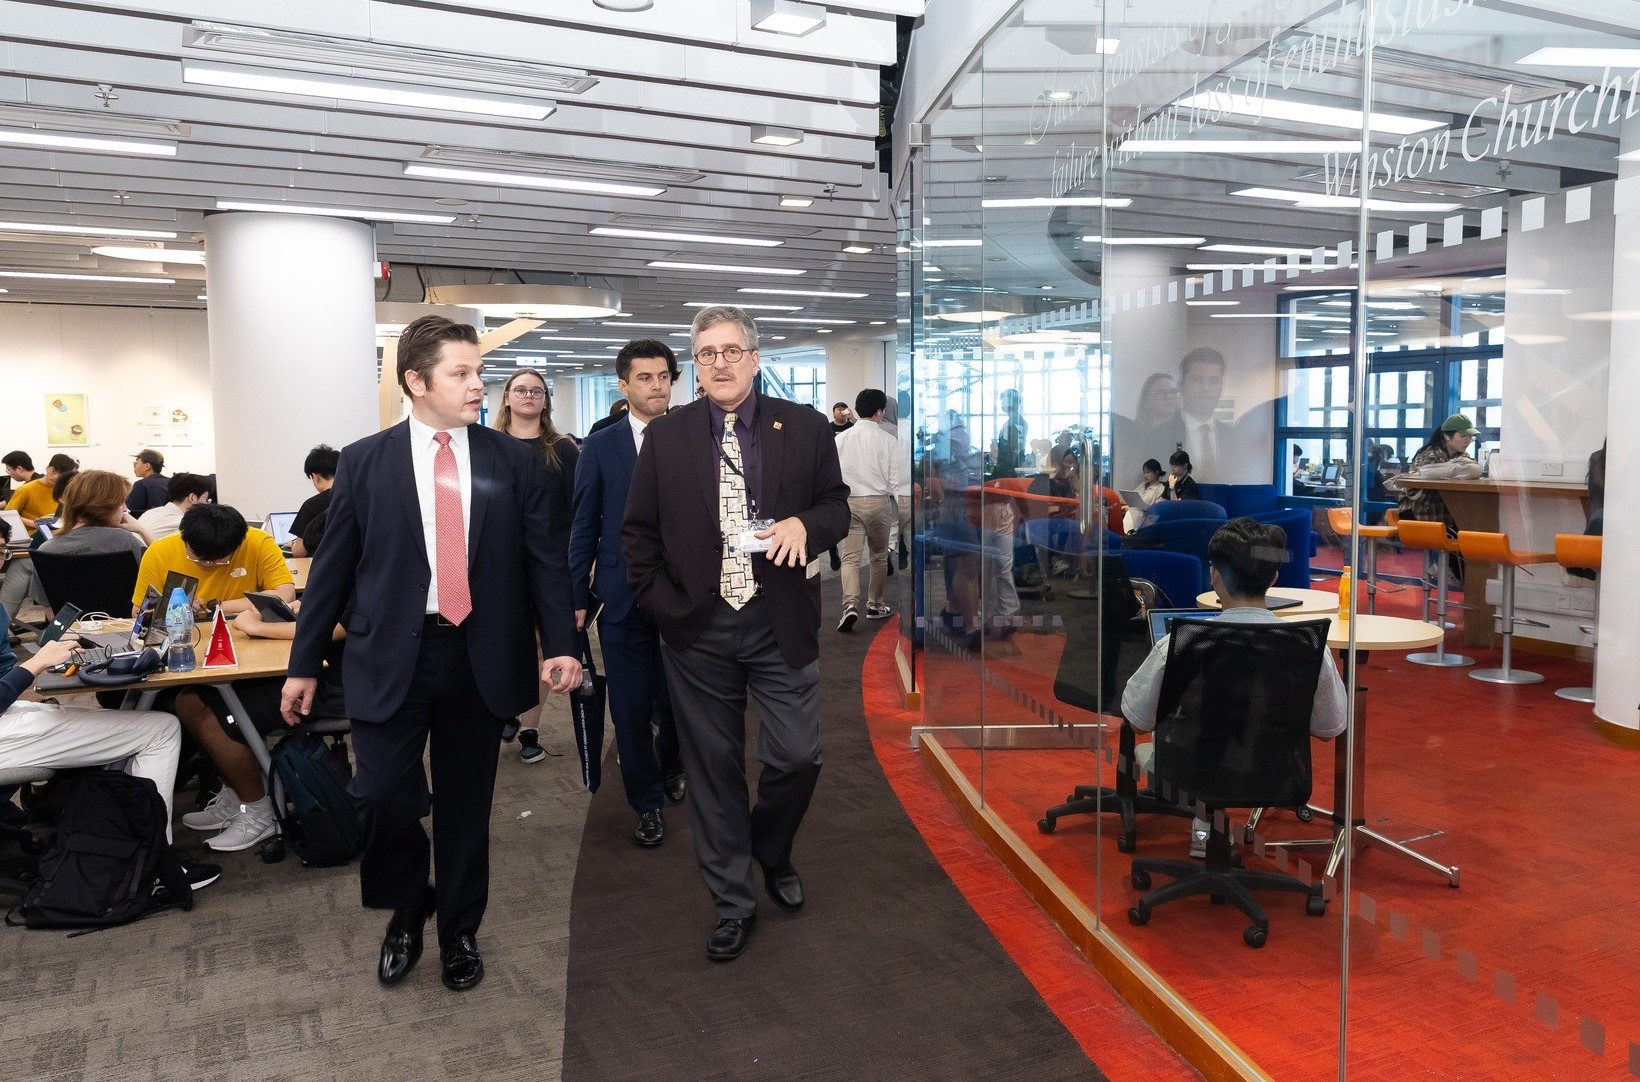 Consul General Evcin and his delegation tour the HKUST Lee Shau Kee Library.